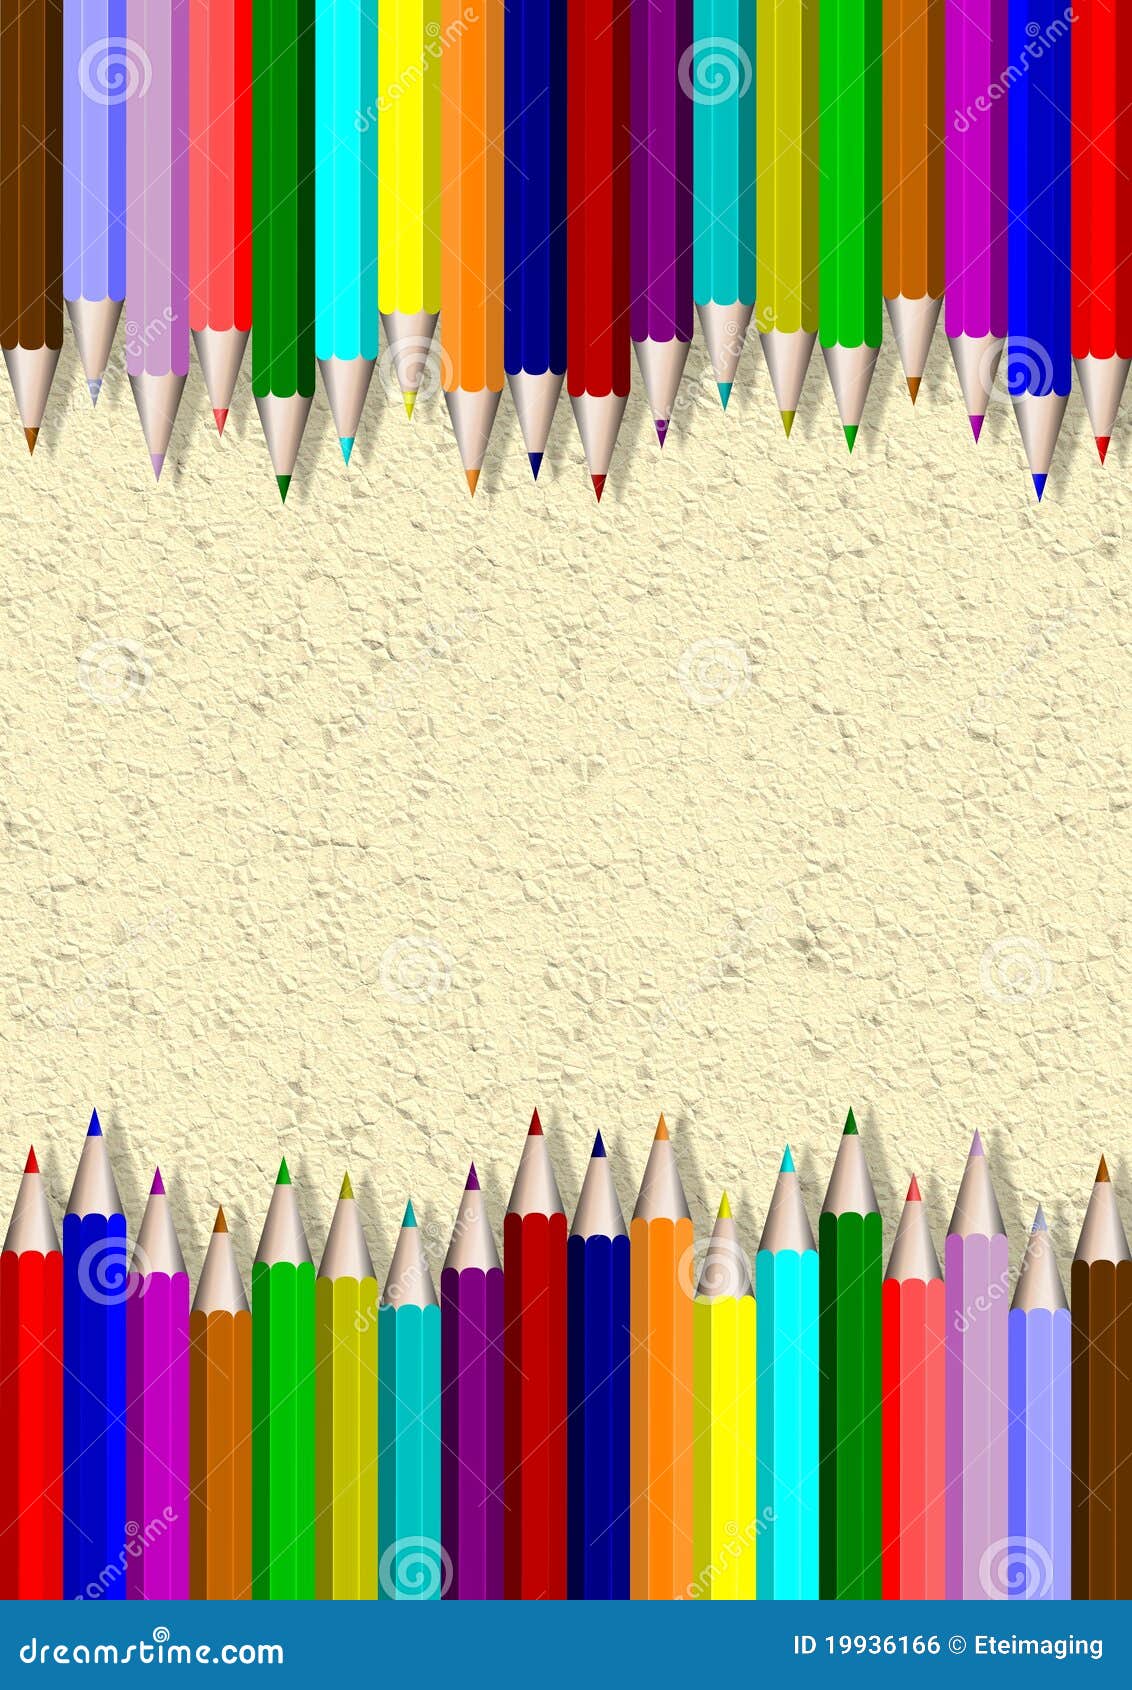 Featured image of post Pencil Border Design On Paper : Boarder designs page borders design borders for paper borders and frames page boarders printable free abc border templates including printable border paper and clip art versions.